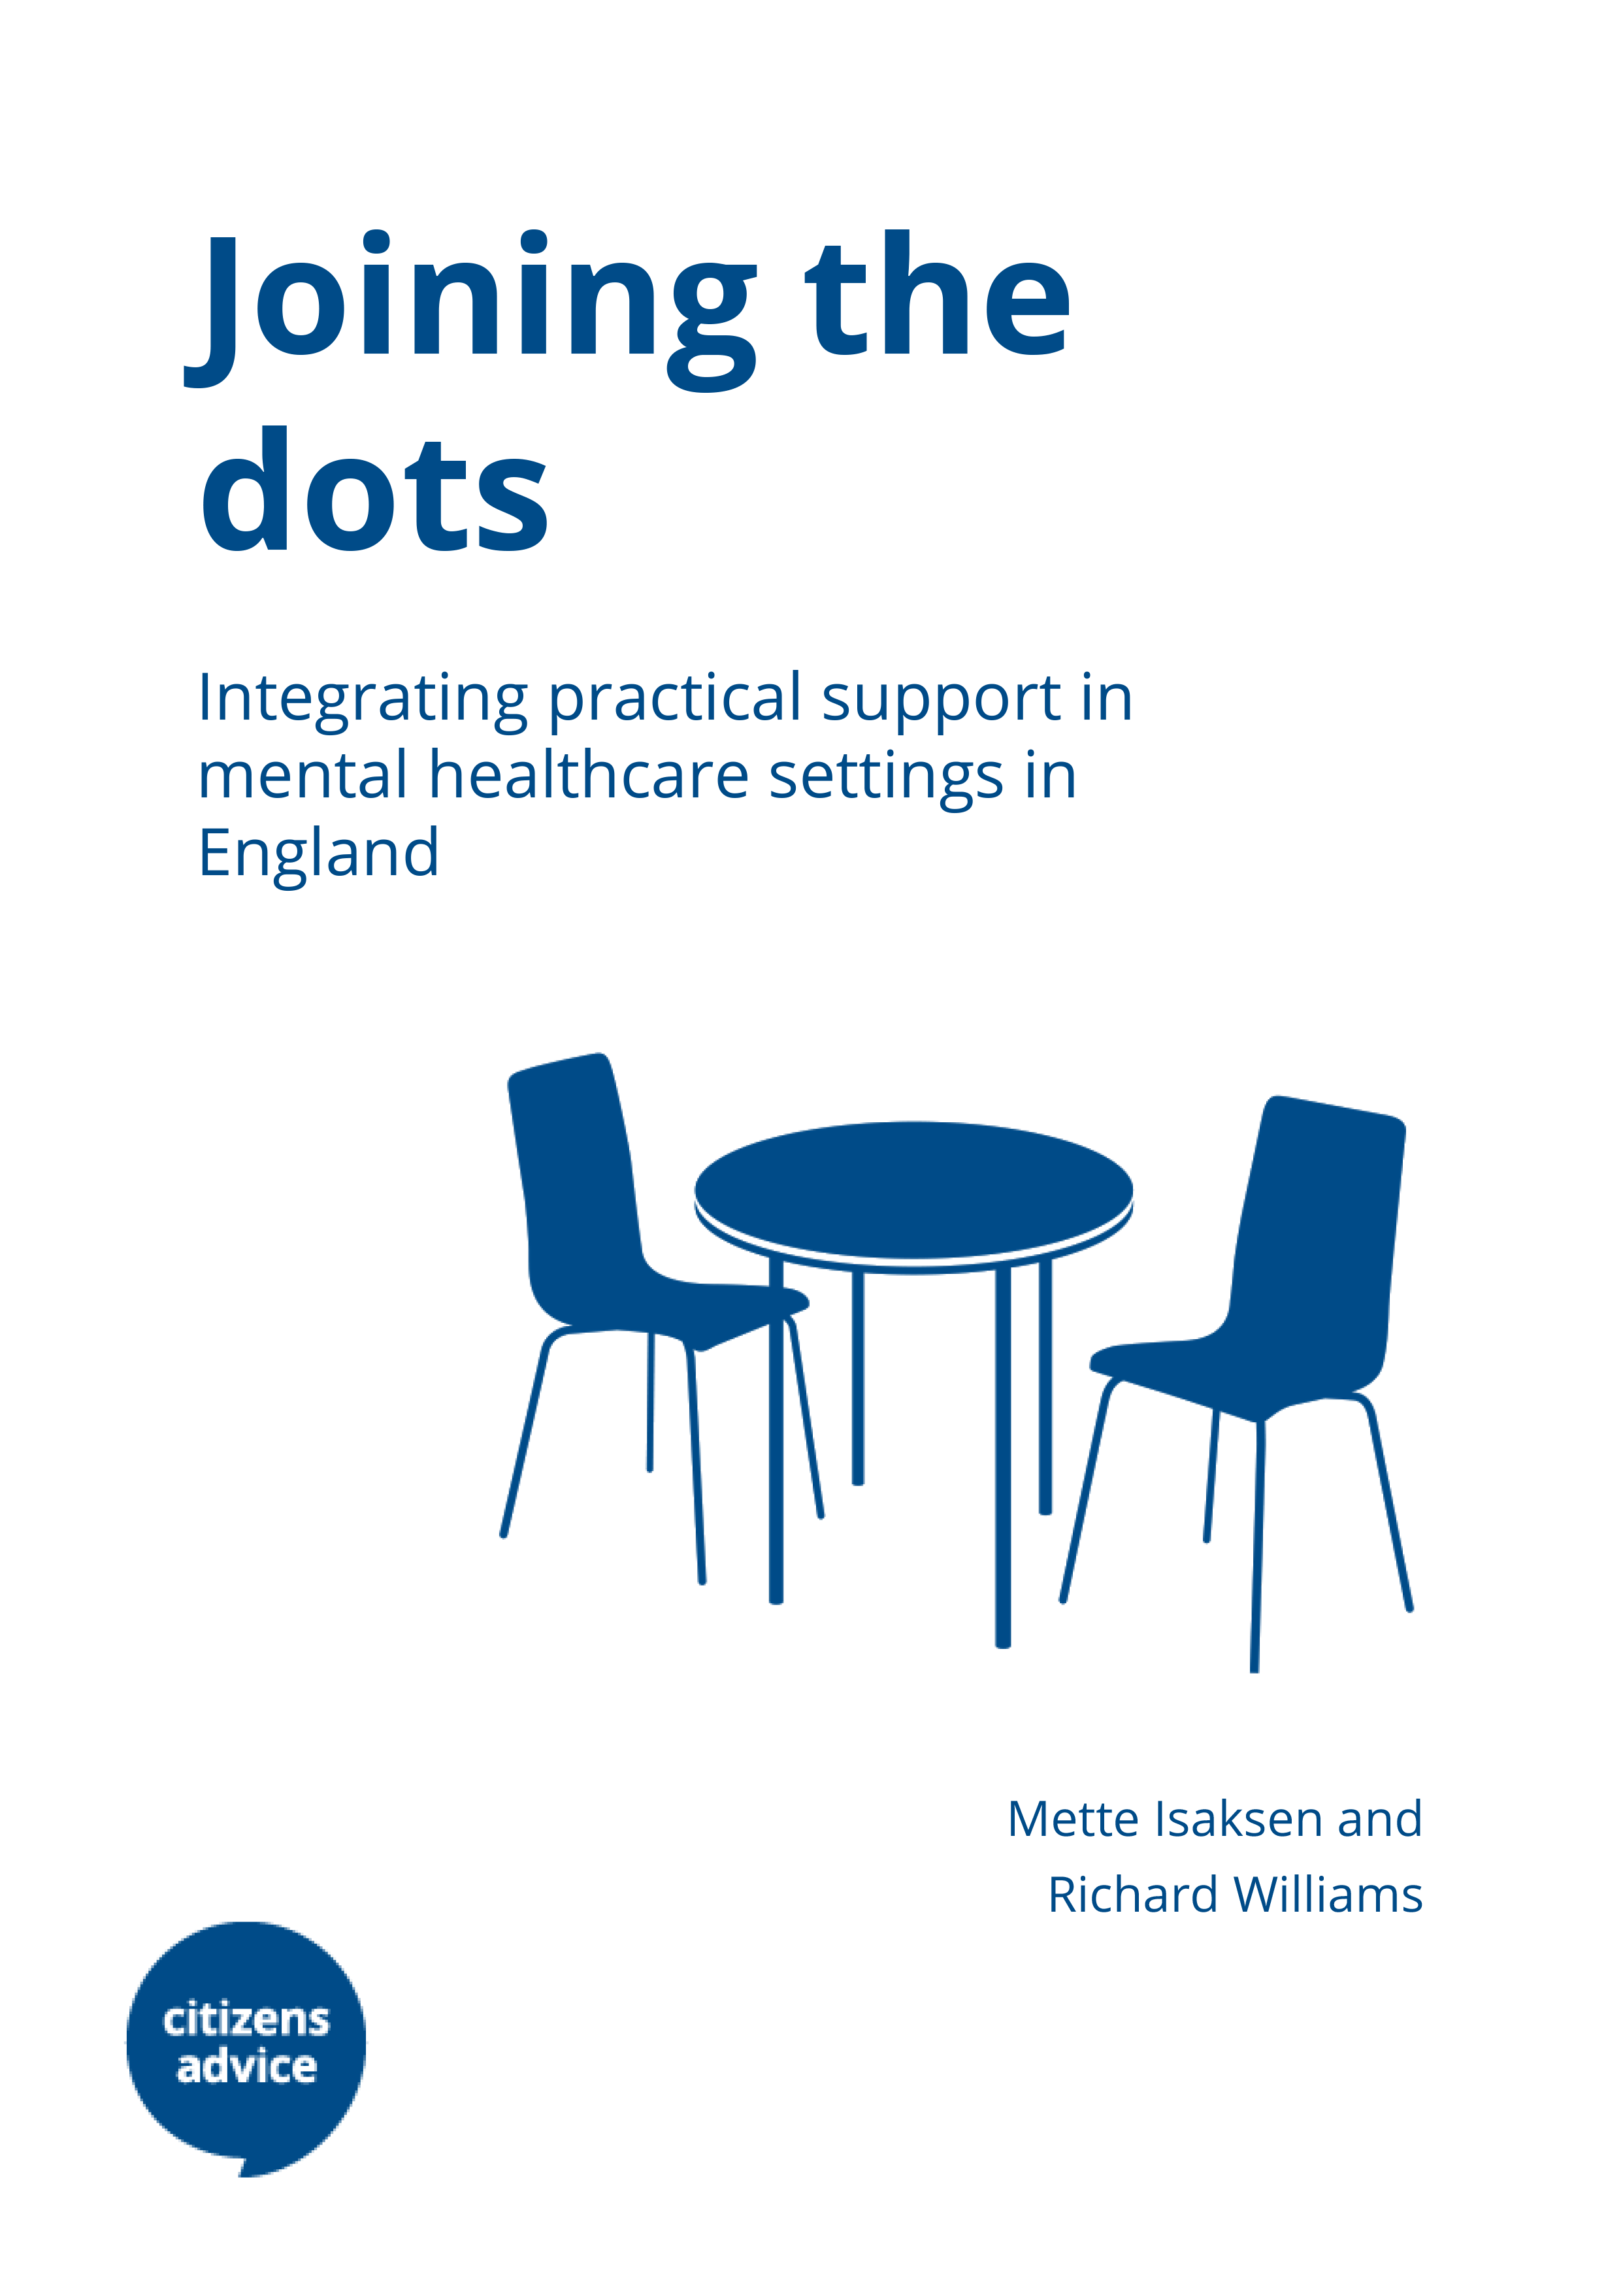 Joining the dots: Integrating practical support in mental healthcare settings in England